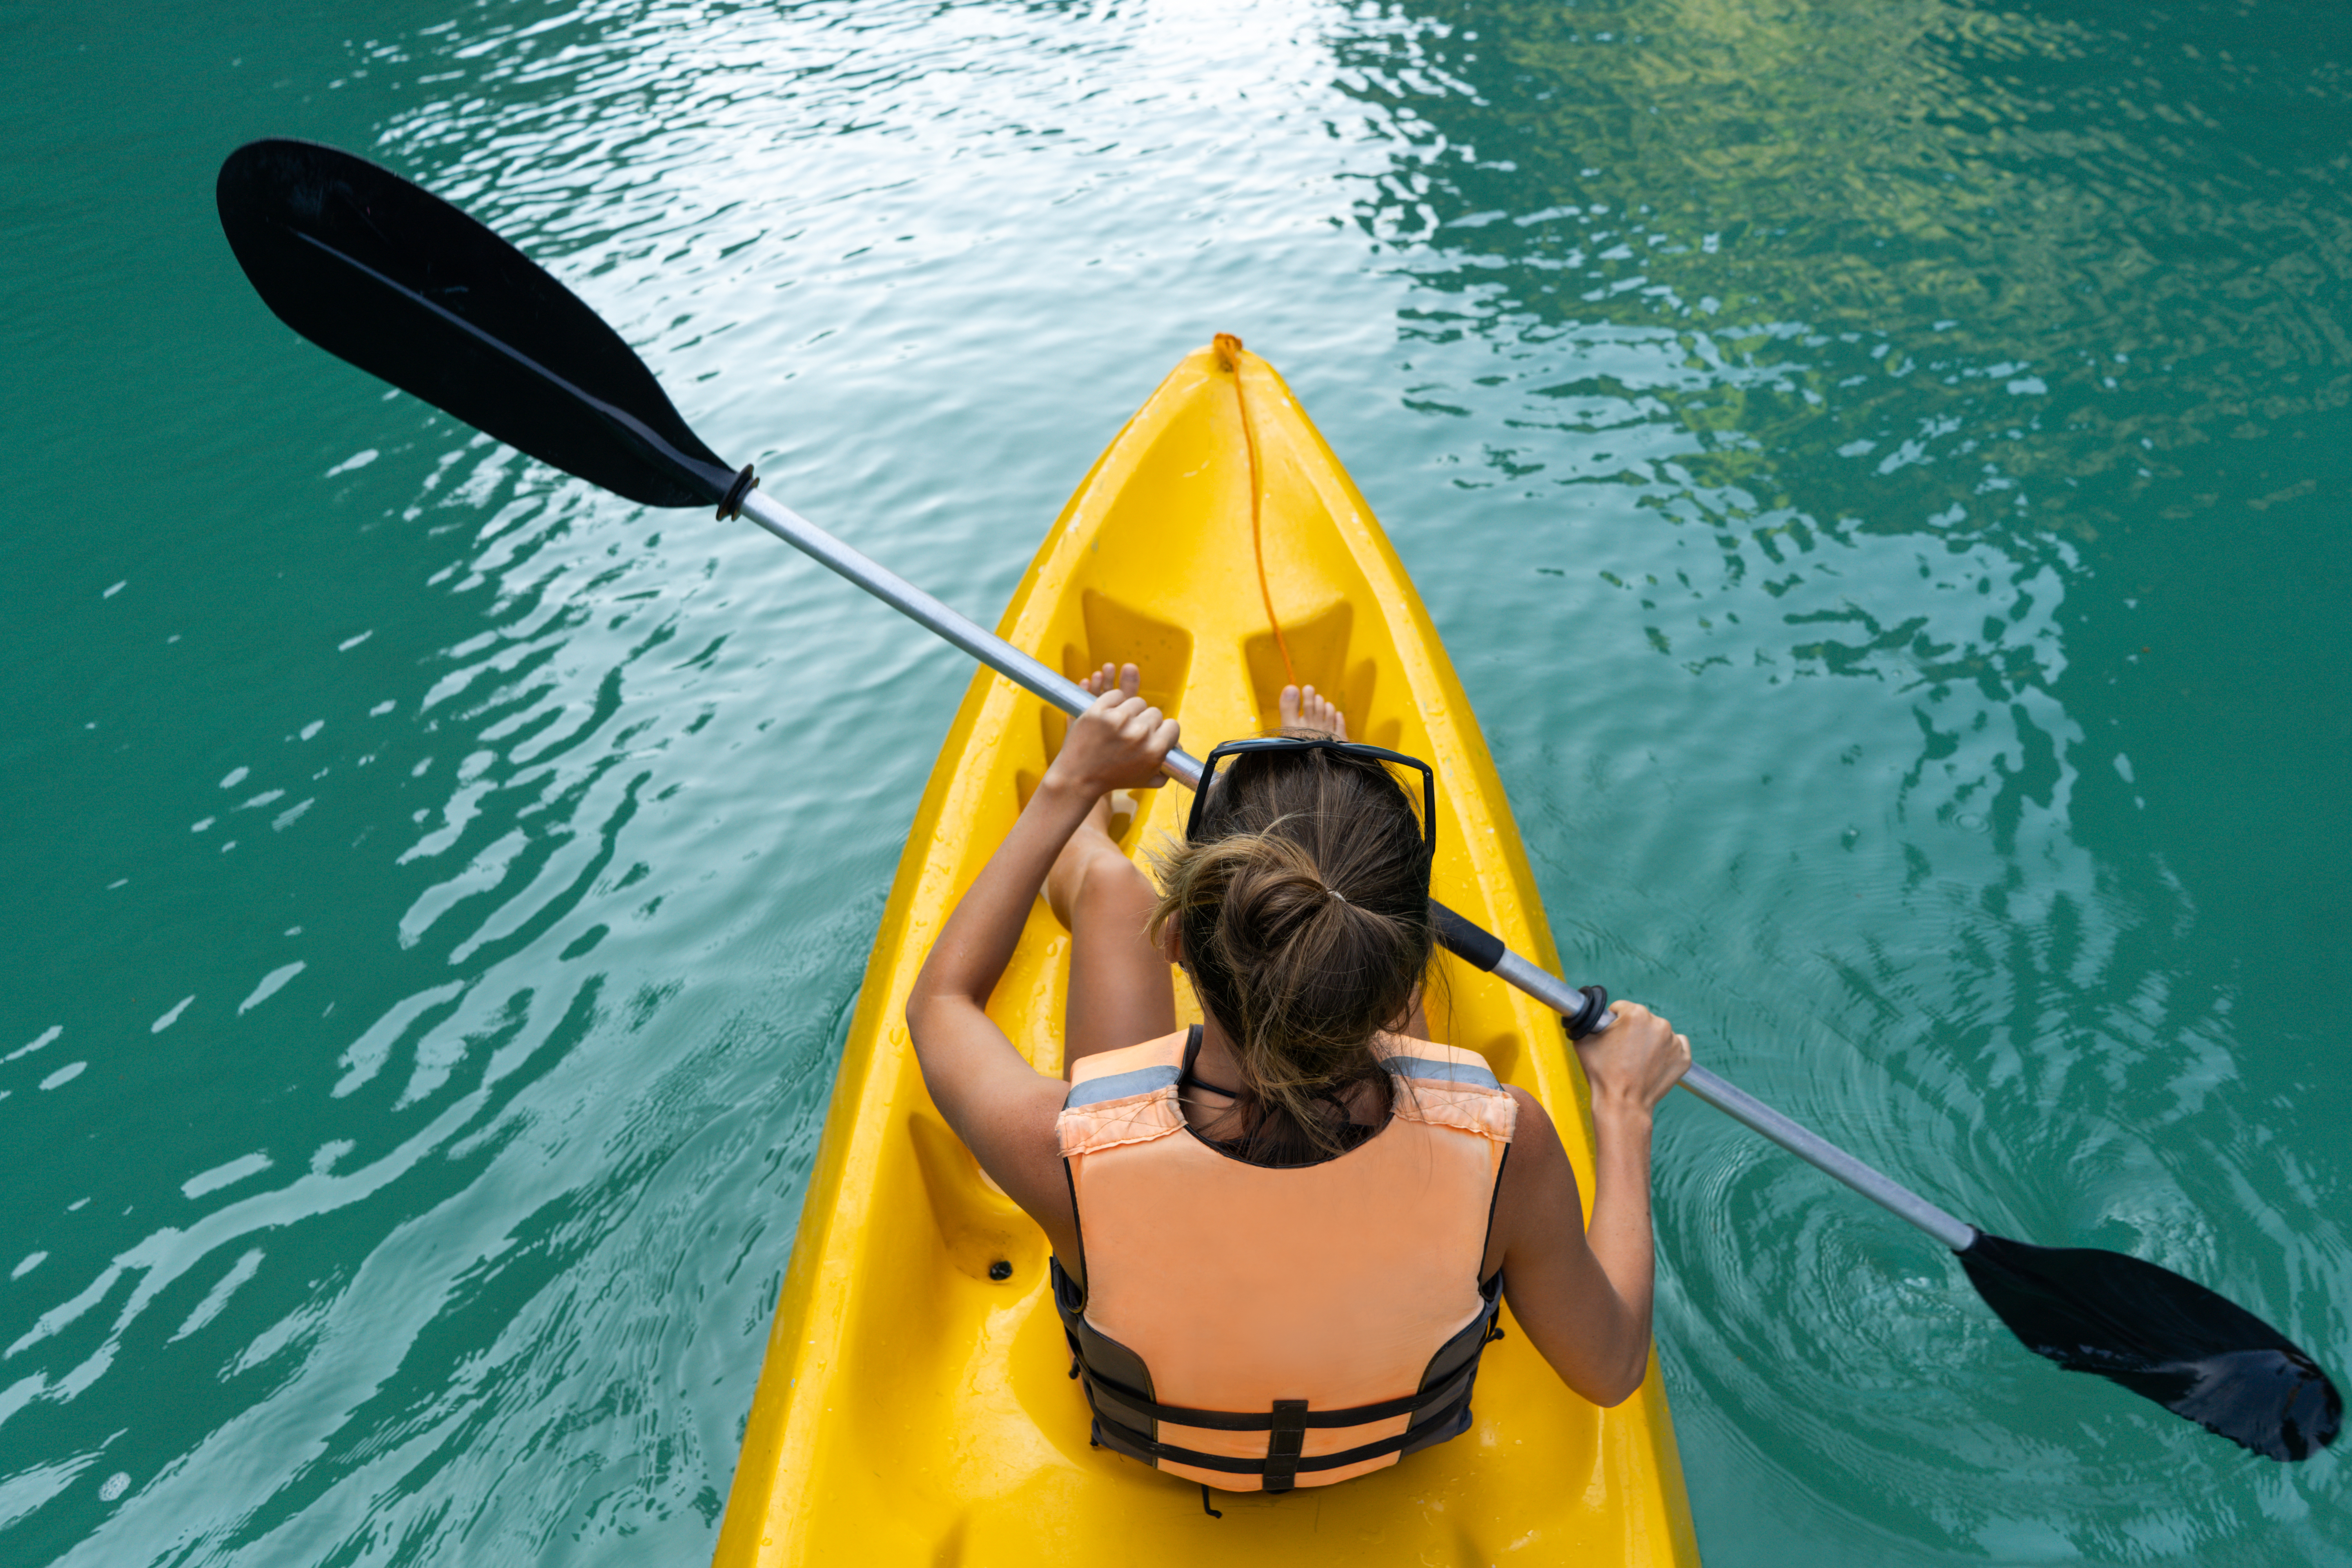 View from above of woman in kayak in blue water